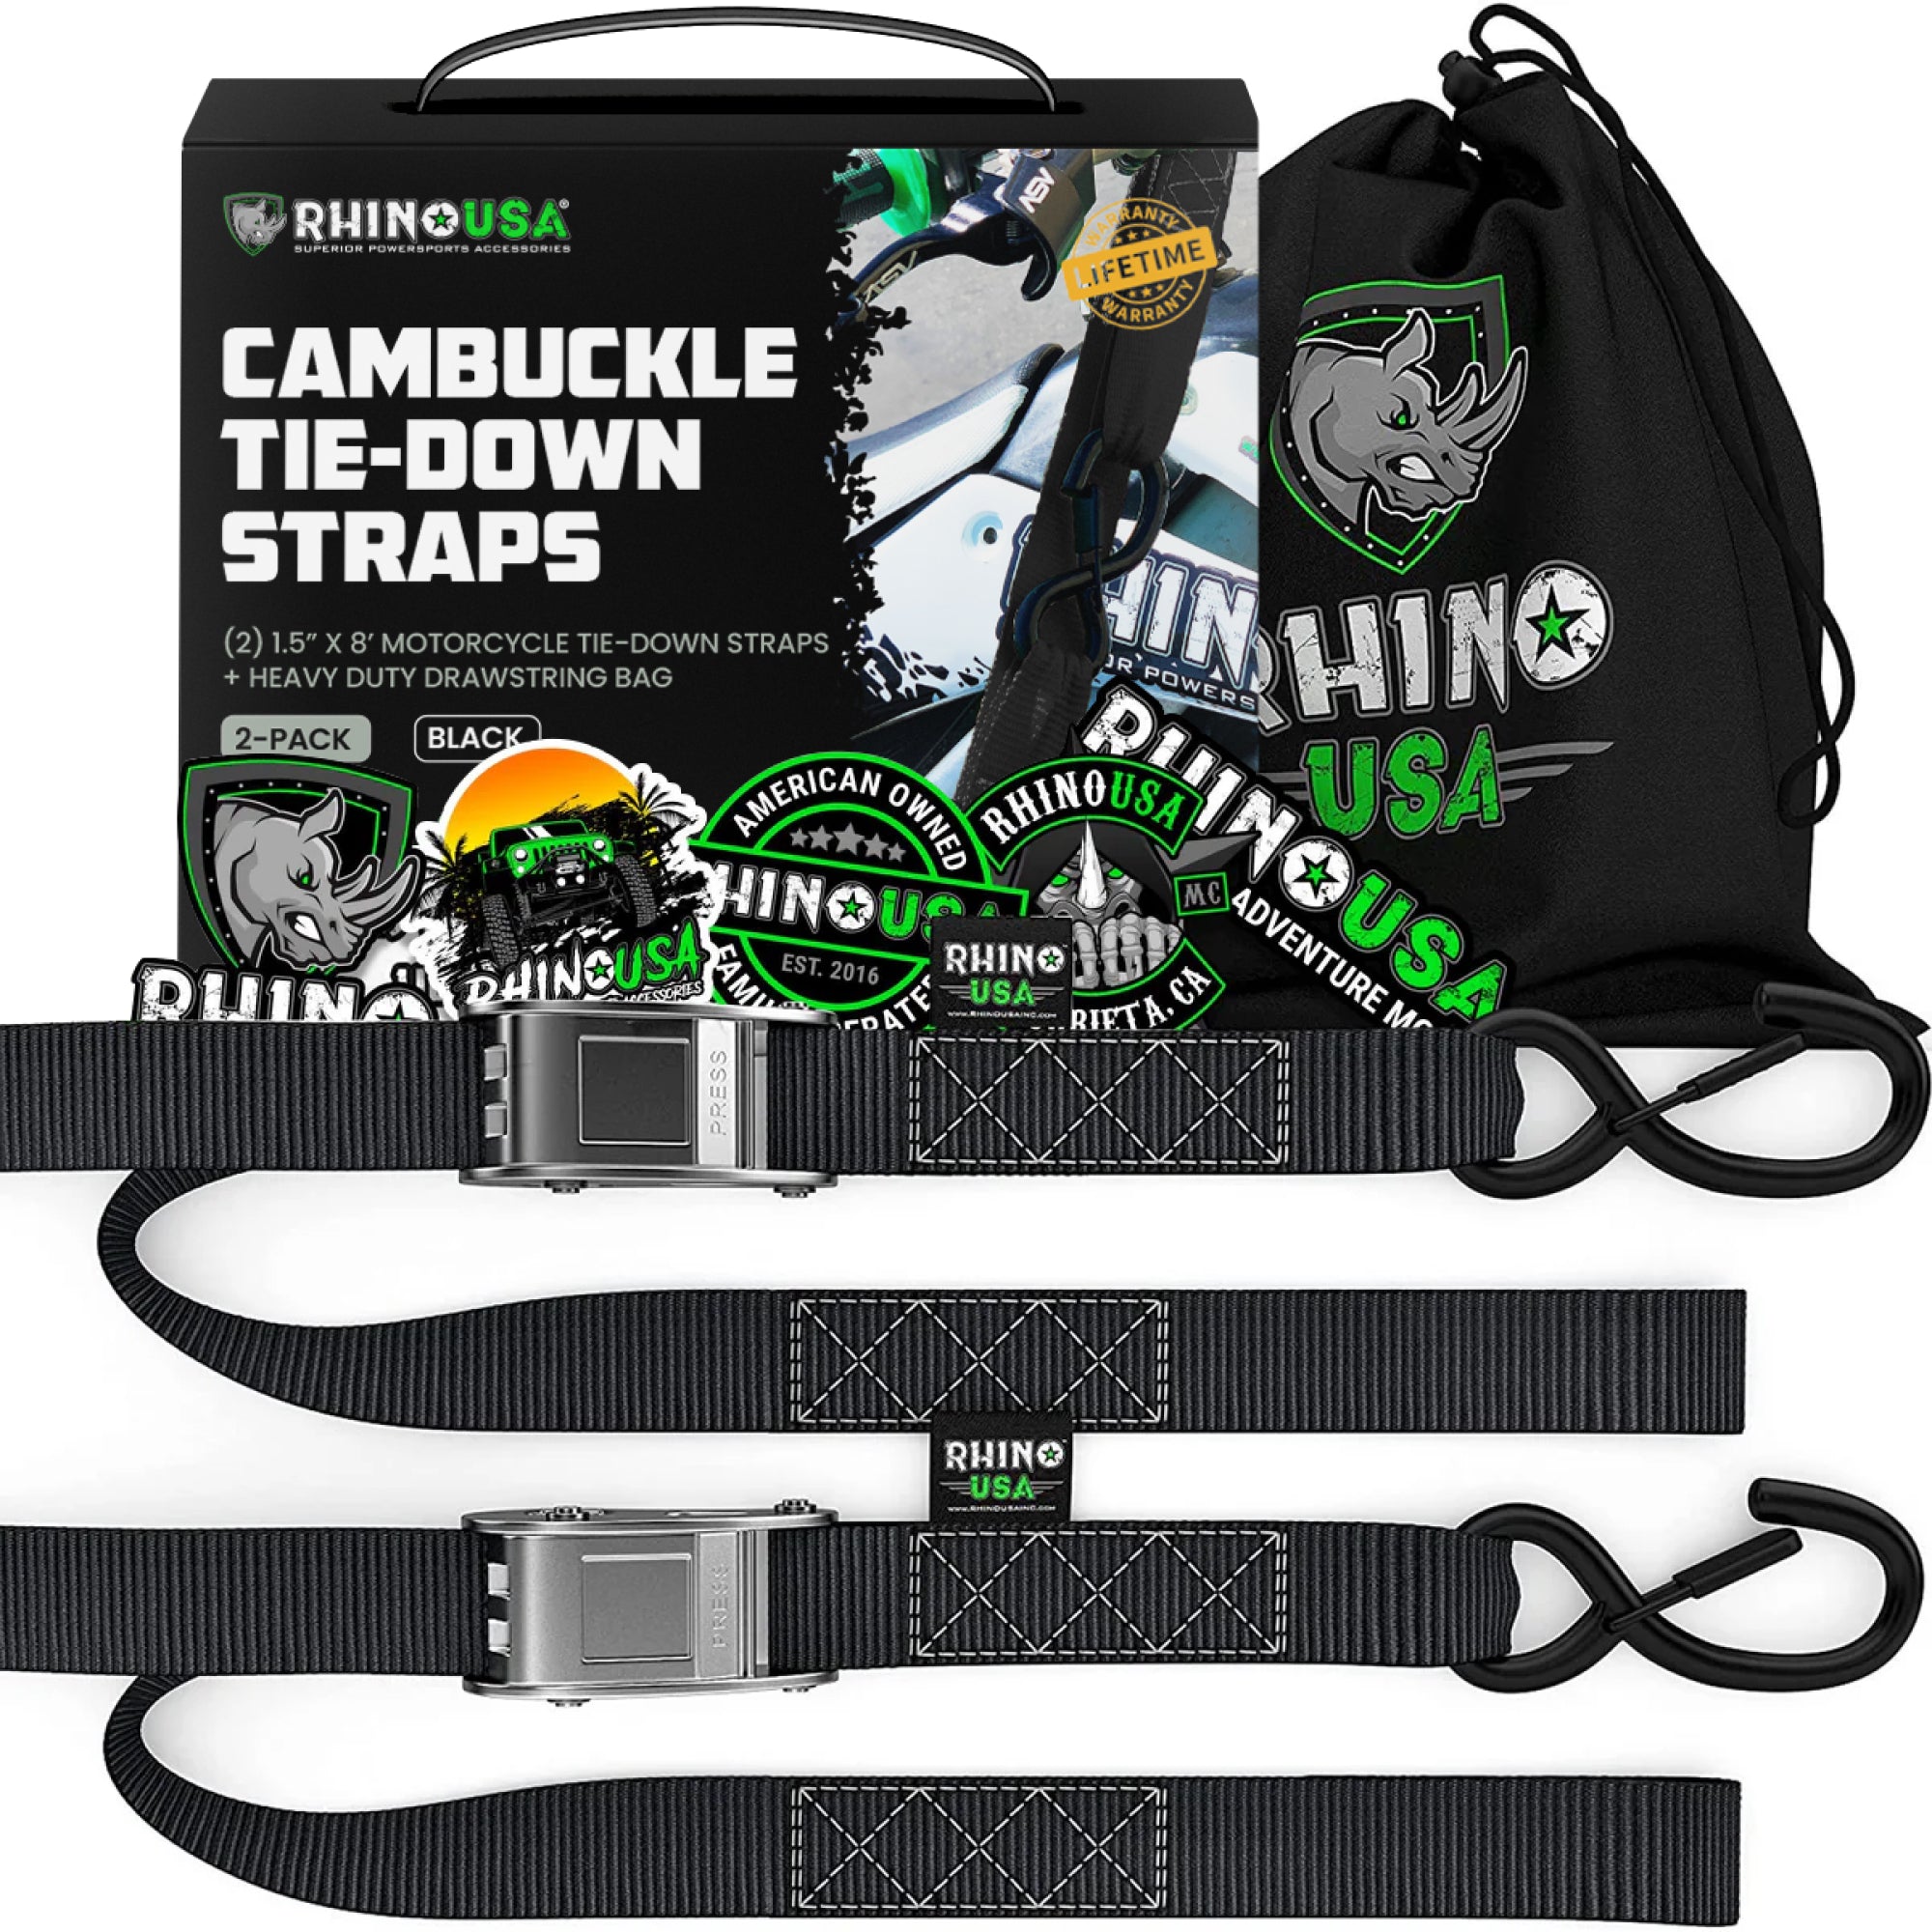 1.5" x 8' Cambuckle Tie-Down Straps (2-Pack)